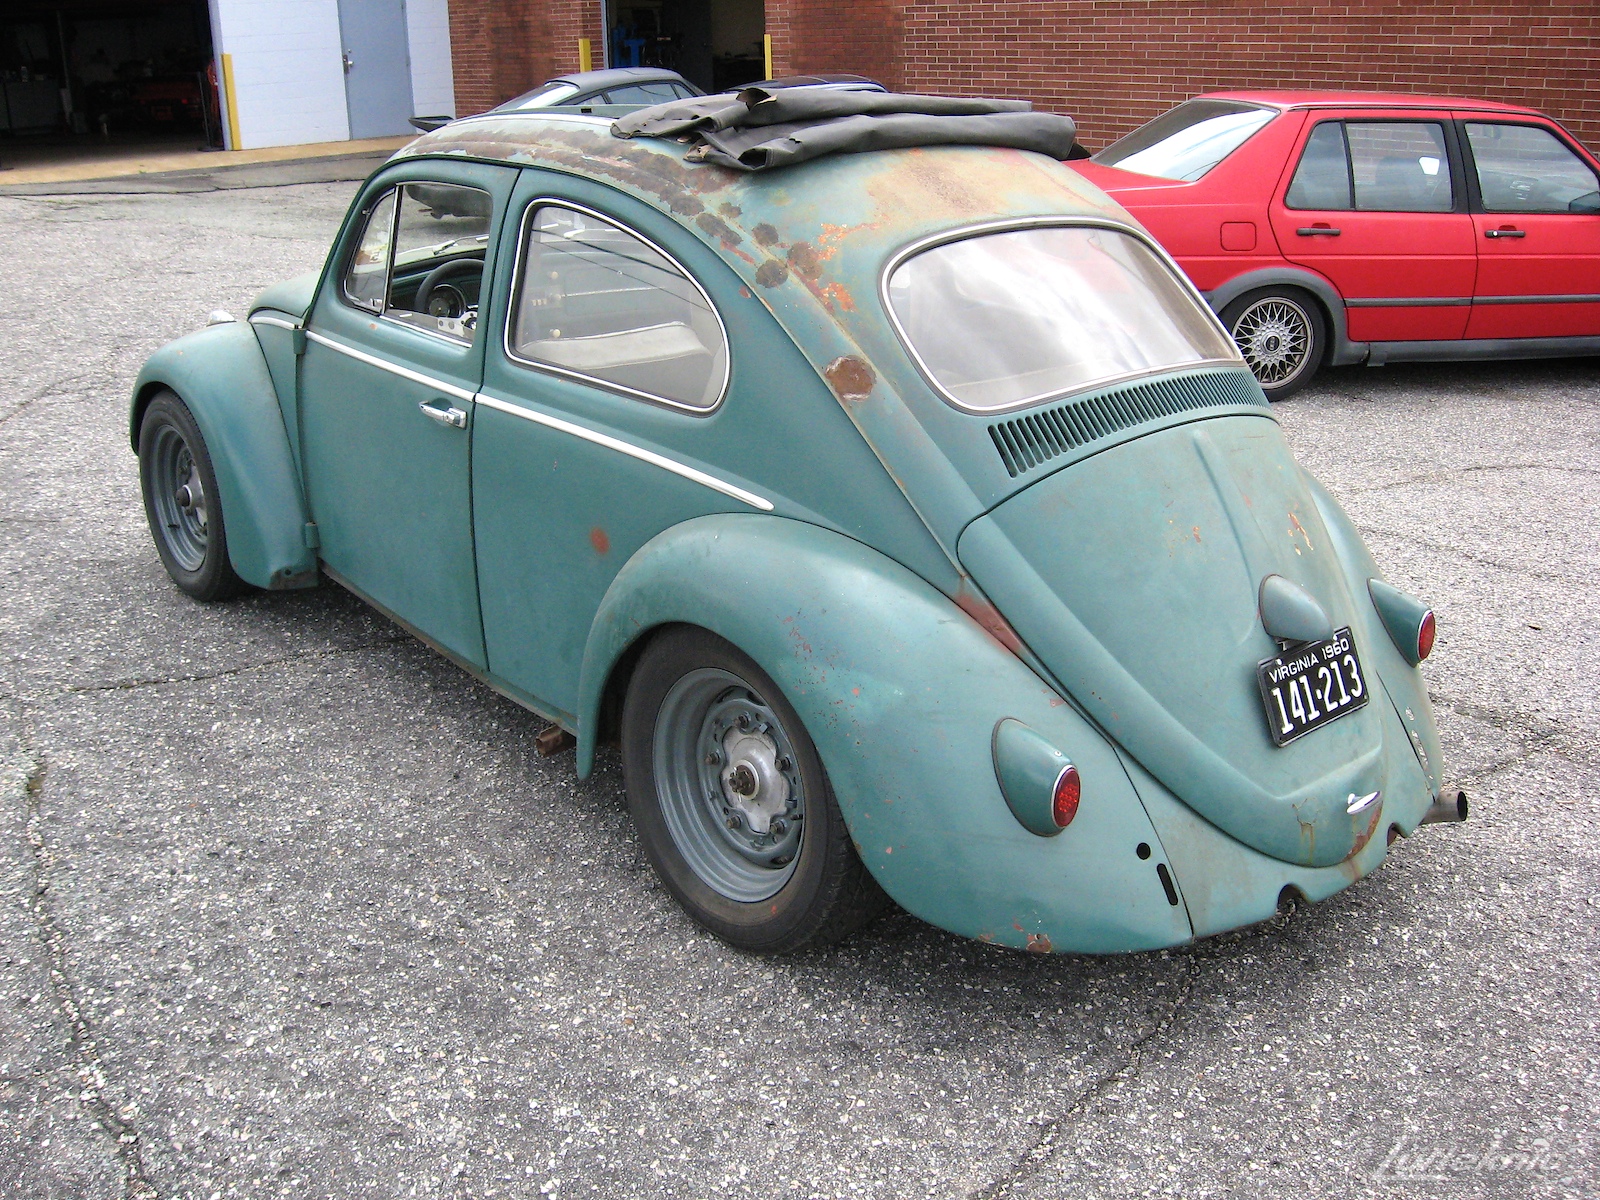 All original green 1960 Beetle with a Porsche 356 engine and brakes.